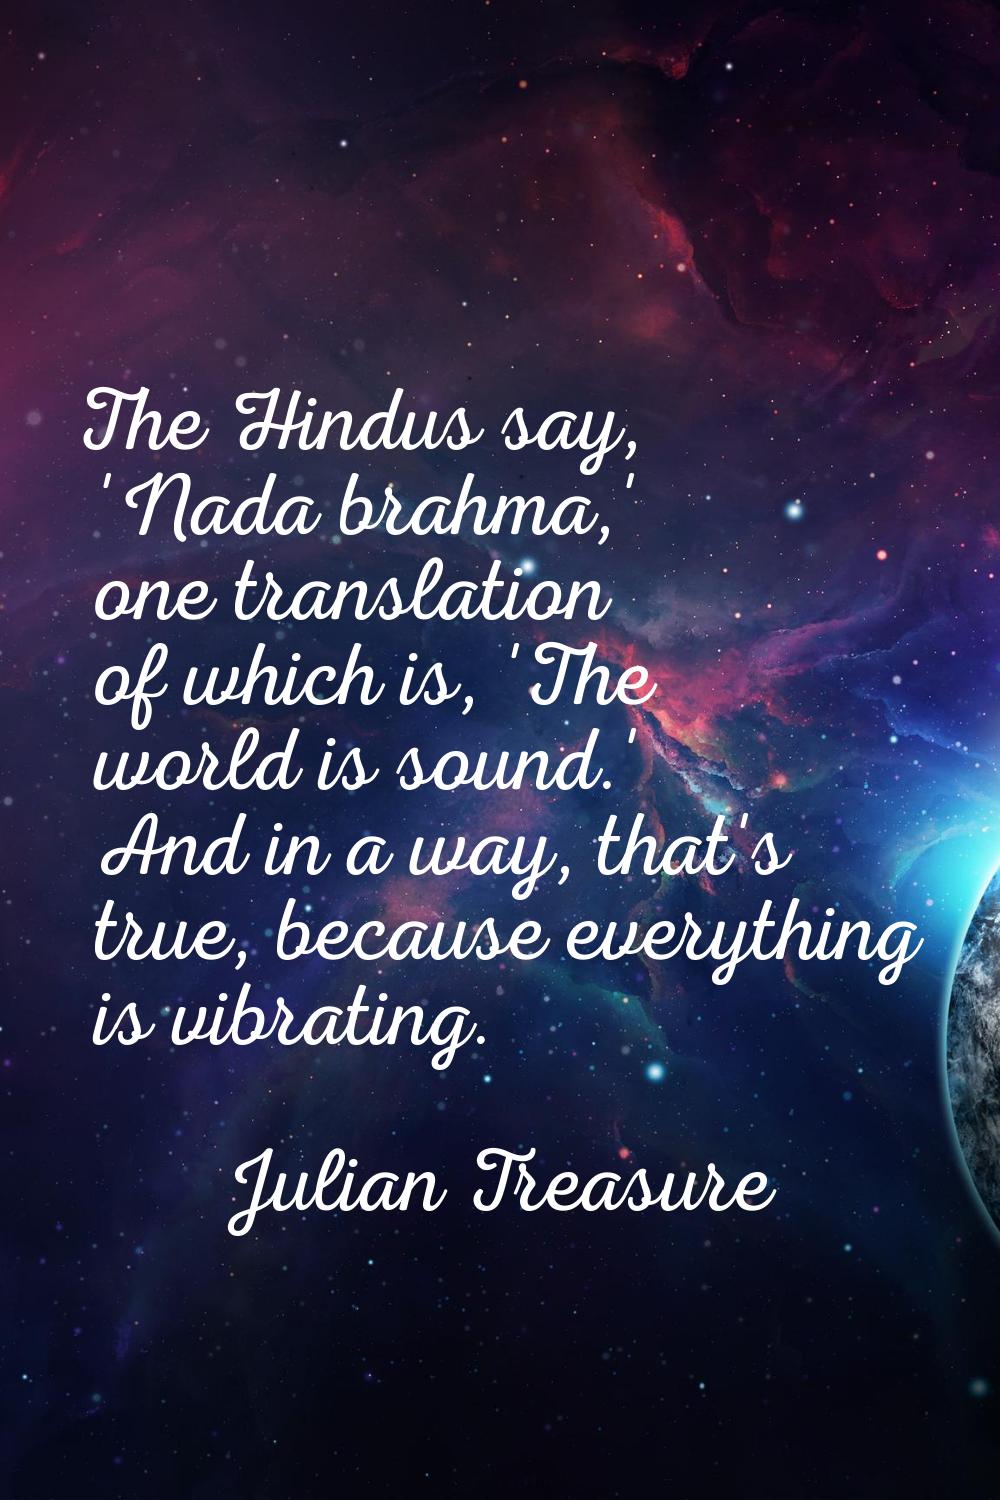 The Hindus say, 'Nada brahma,' one translation of which is, 'The world is sound.' And in a way, tha